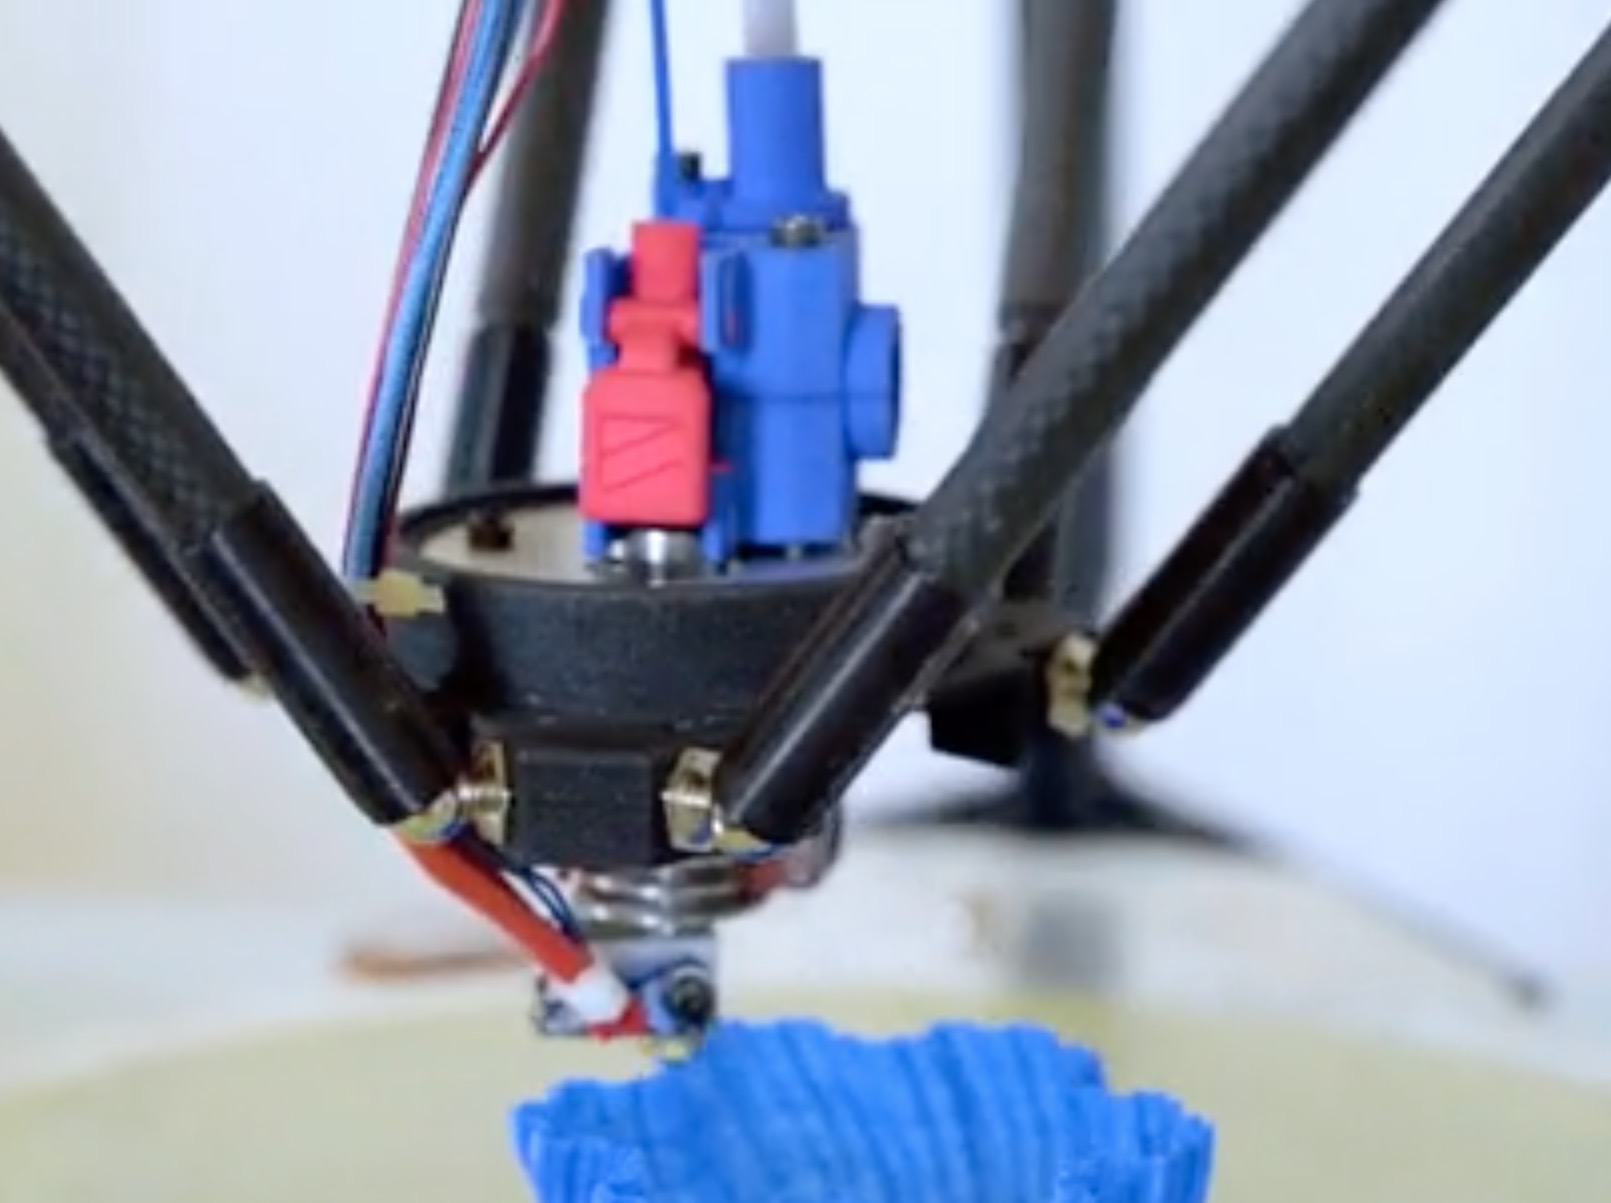  The Zesty Nimble 3D printer extruder in use on a delta-style machine 